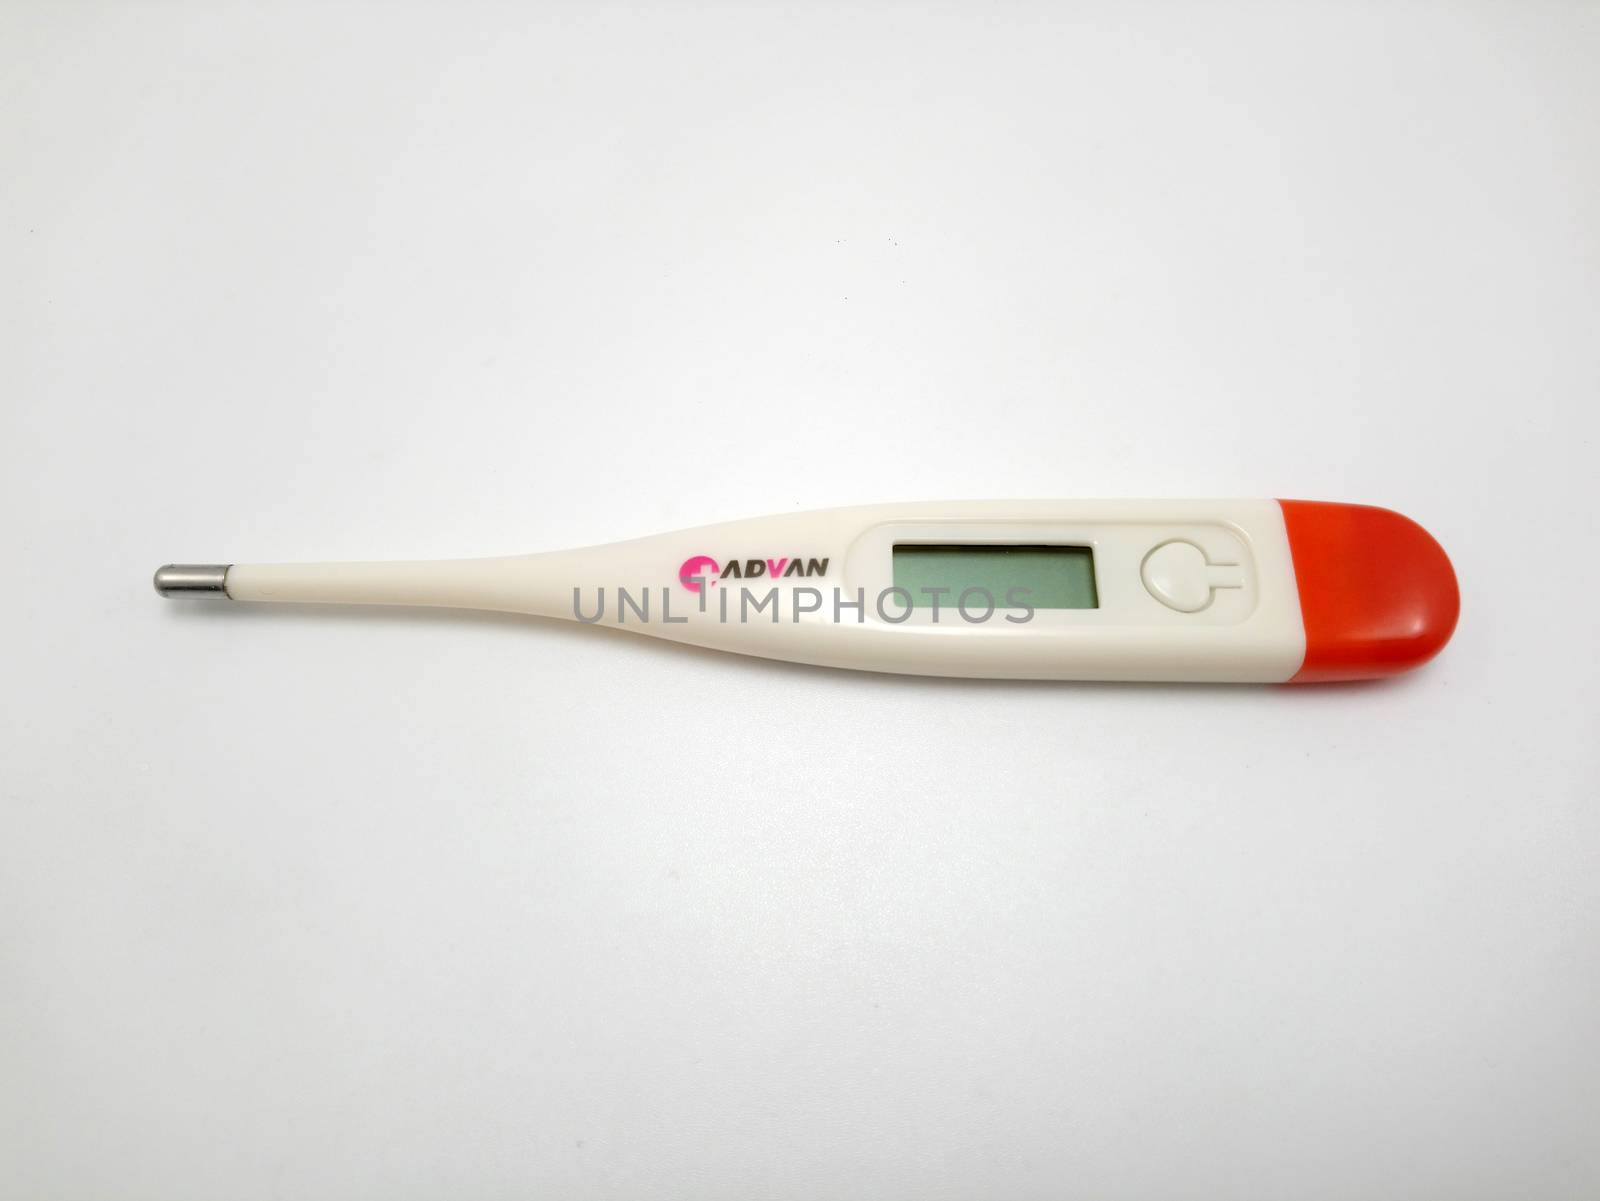 Advan digital thermometer in Manila, Philippines by imwaltersy